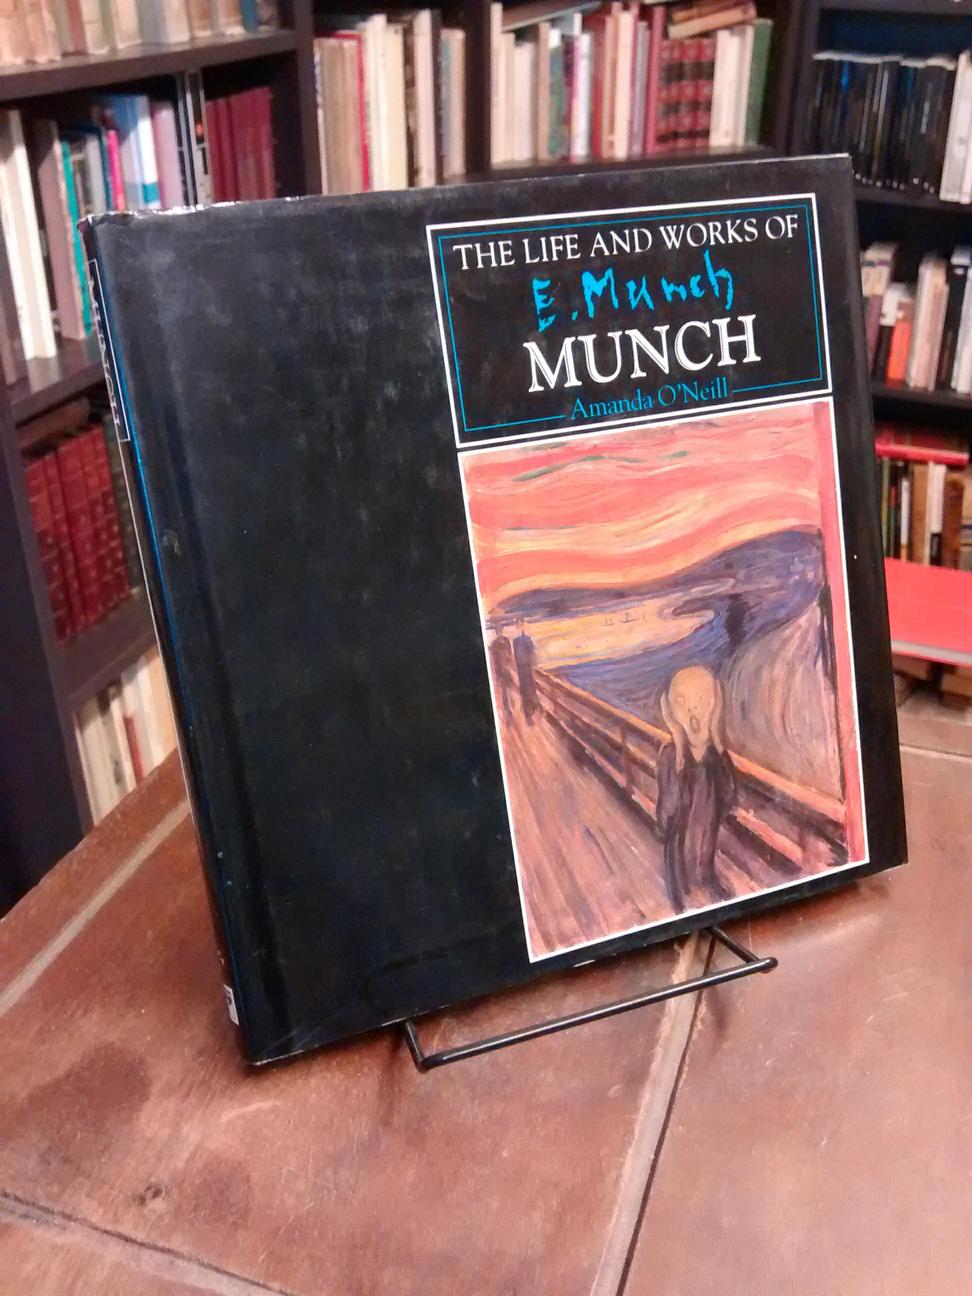 The Life and Works of E. Munch - Amanda O' Neill